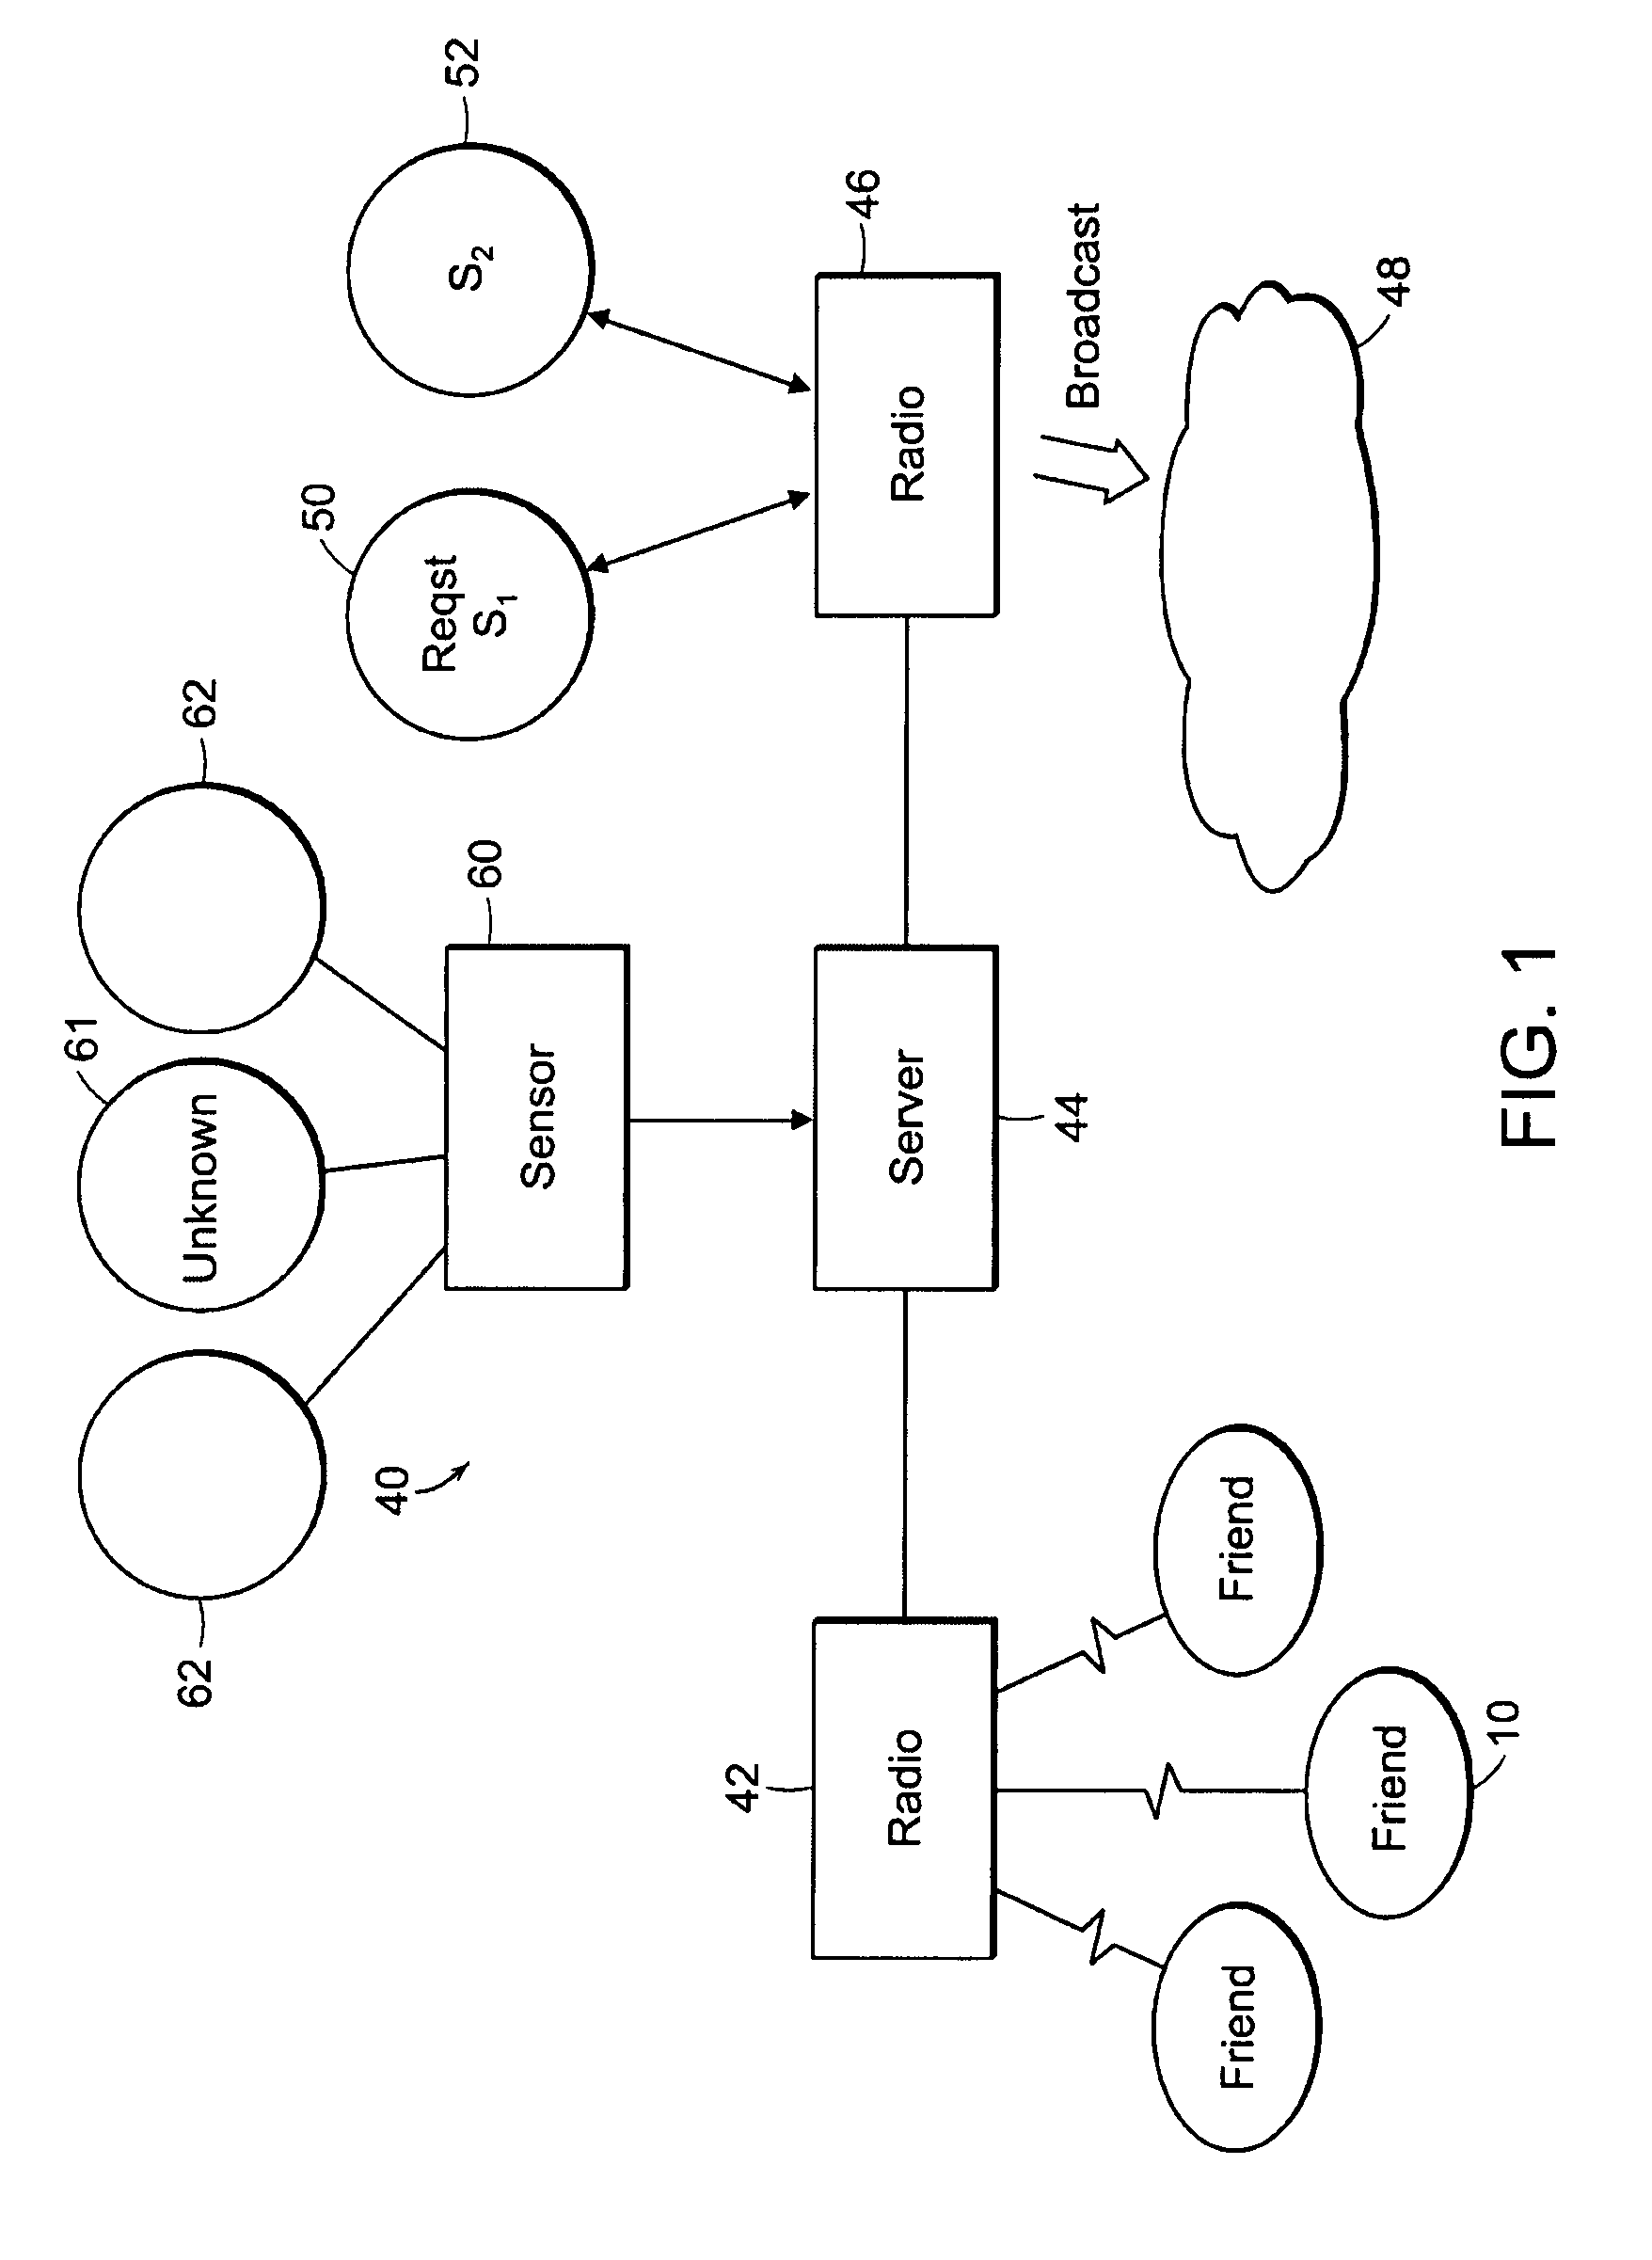 GPS based friend location and identification system and method